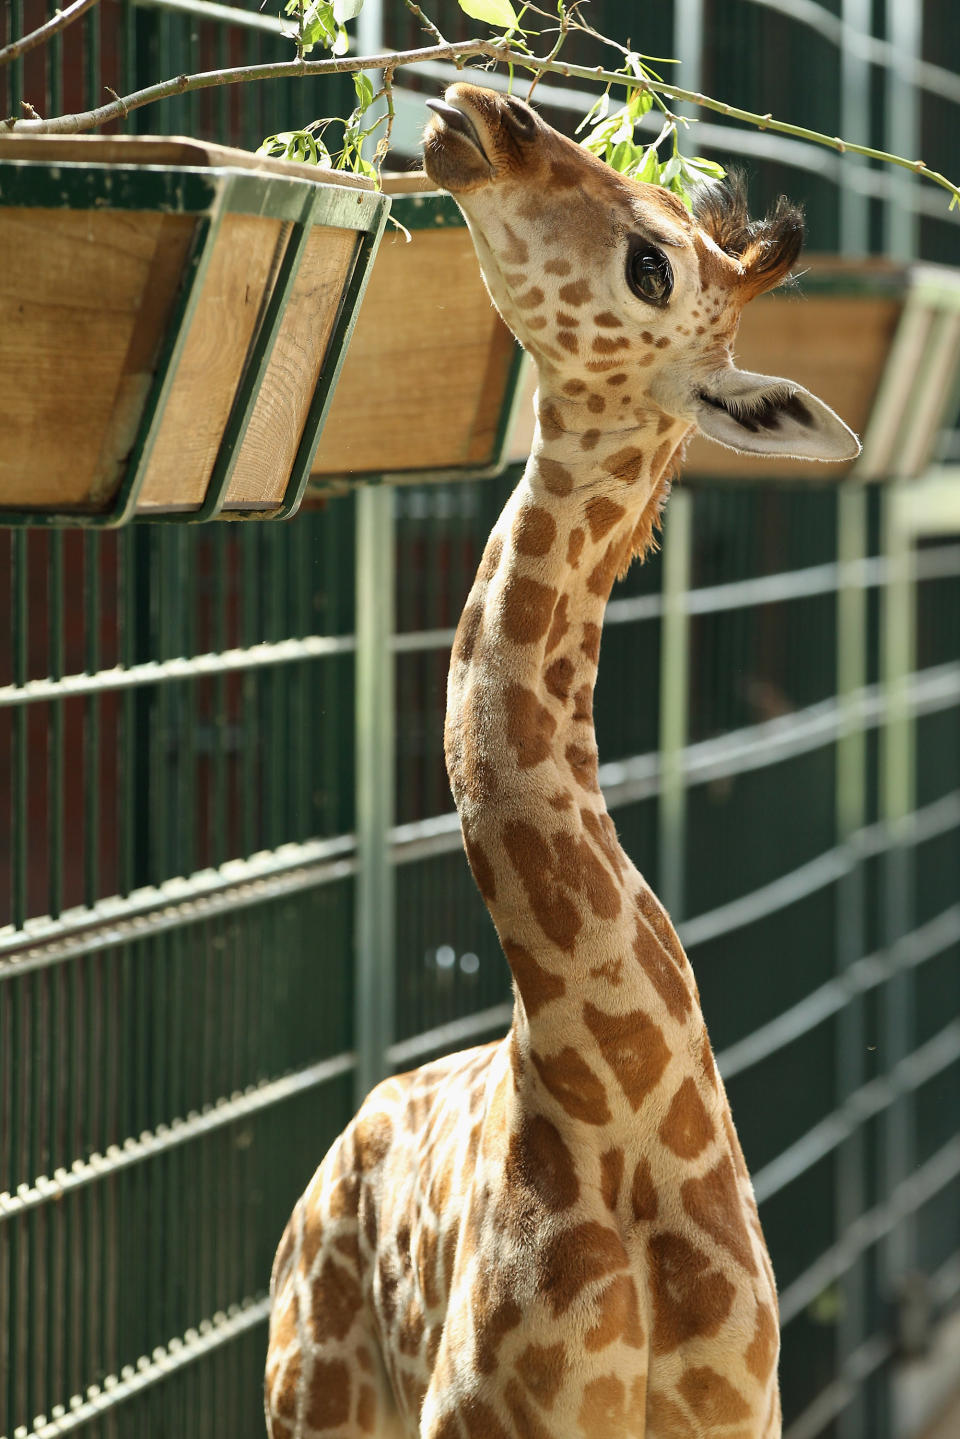 BERLIN, GERMANY - JUNE 29: Jule, a baby Rothschild giraffe, munches on a branch in her enclosure at Tierpark zoo on June 29, 2012 in Berlin, Germany. Jule was born at the zoo on June 10. (Photo by Sean Gallup/Getty Images)